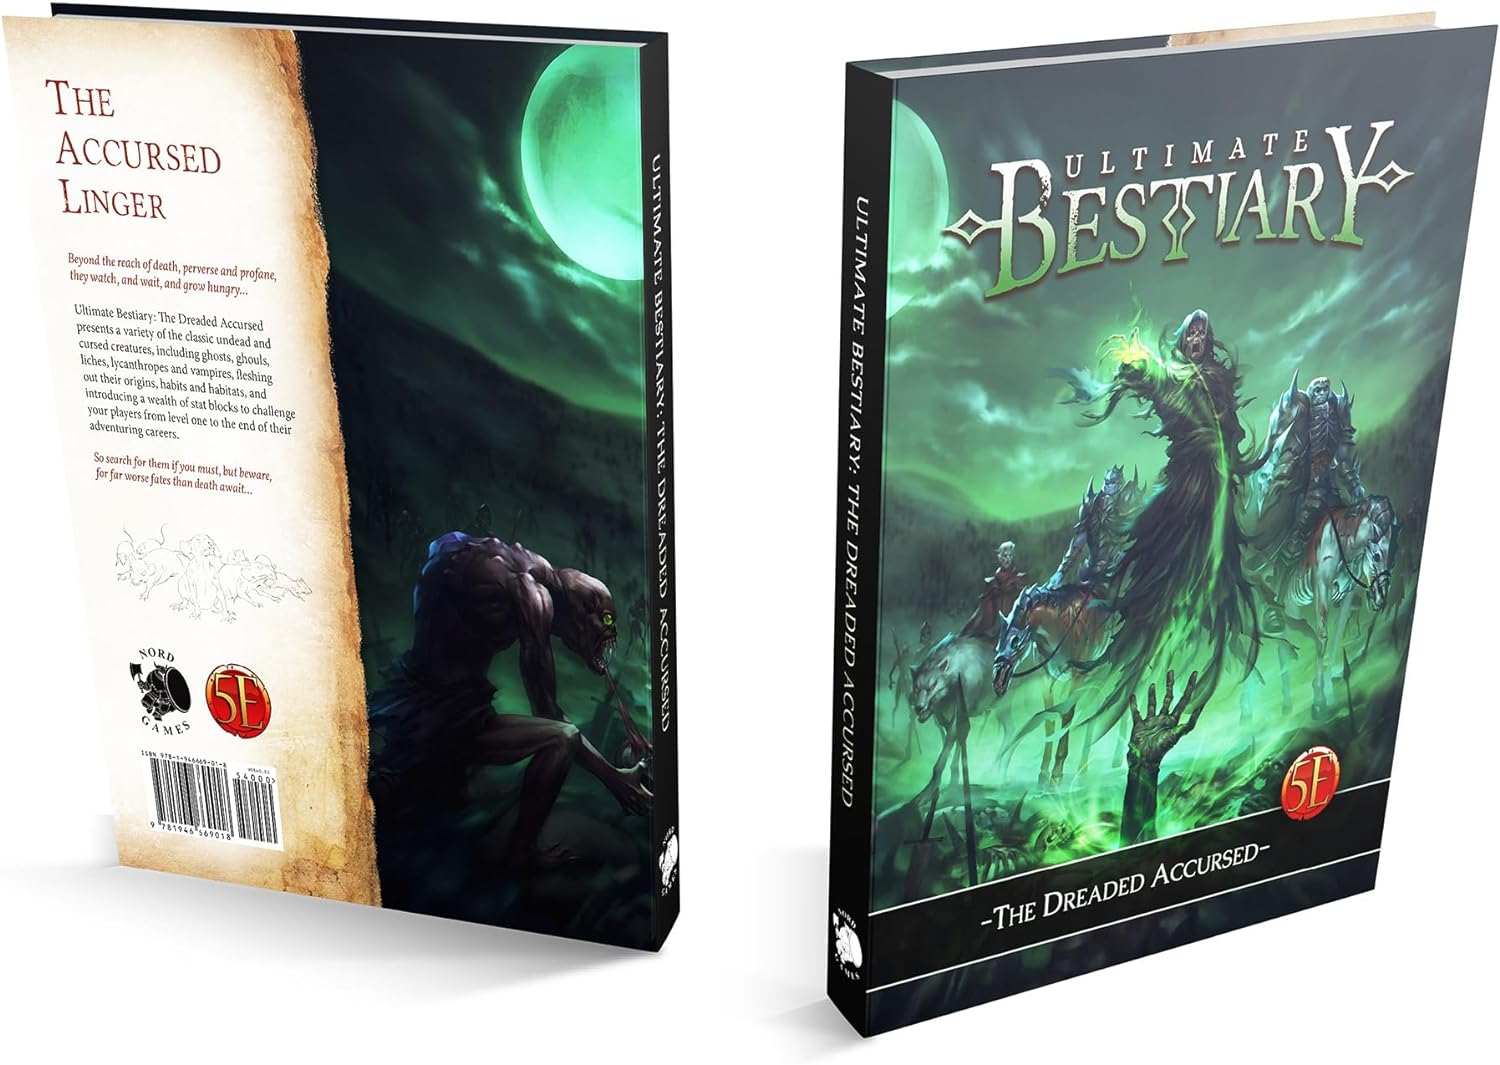 Ultimate Bestiary: The Dreaded Accursed - Hardcover RPG Supplement Book, Classic Undead & Cursed Creatures, 5e D&D